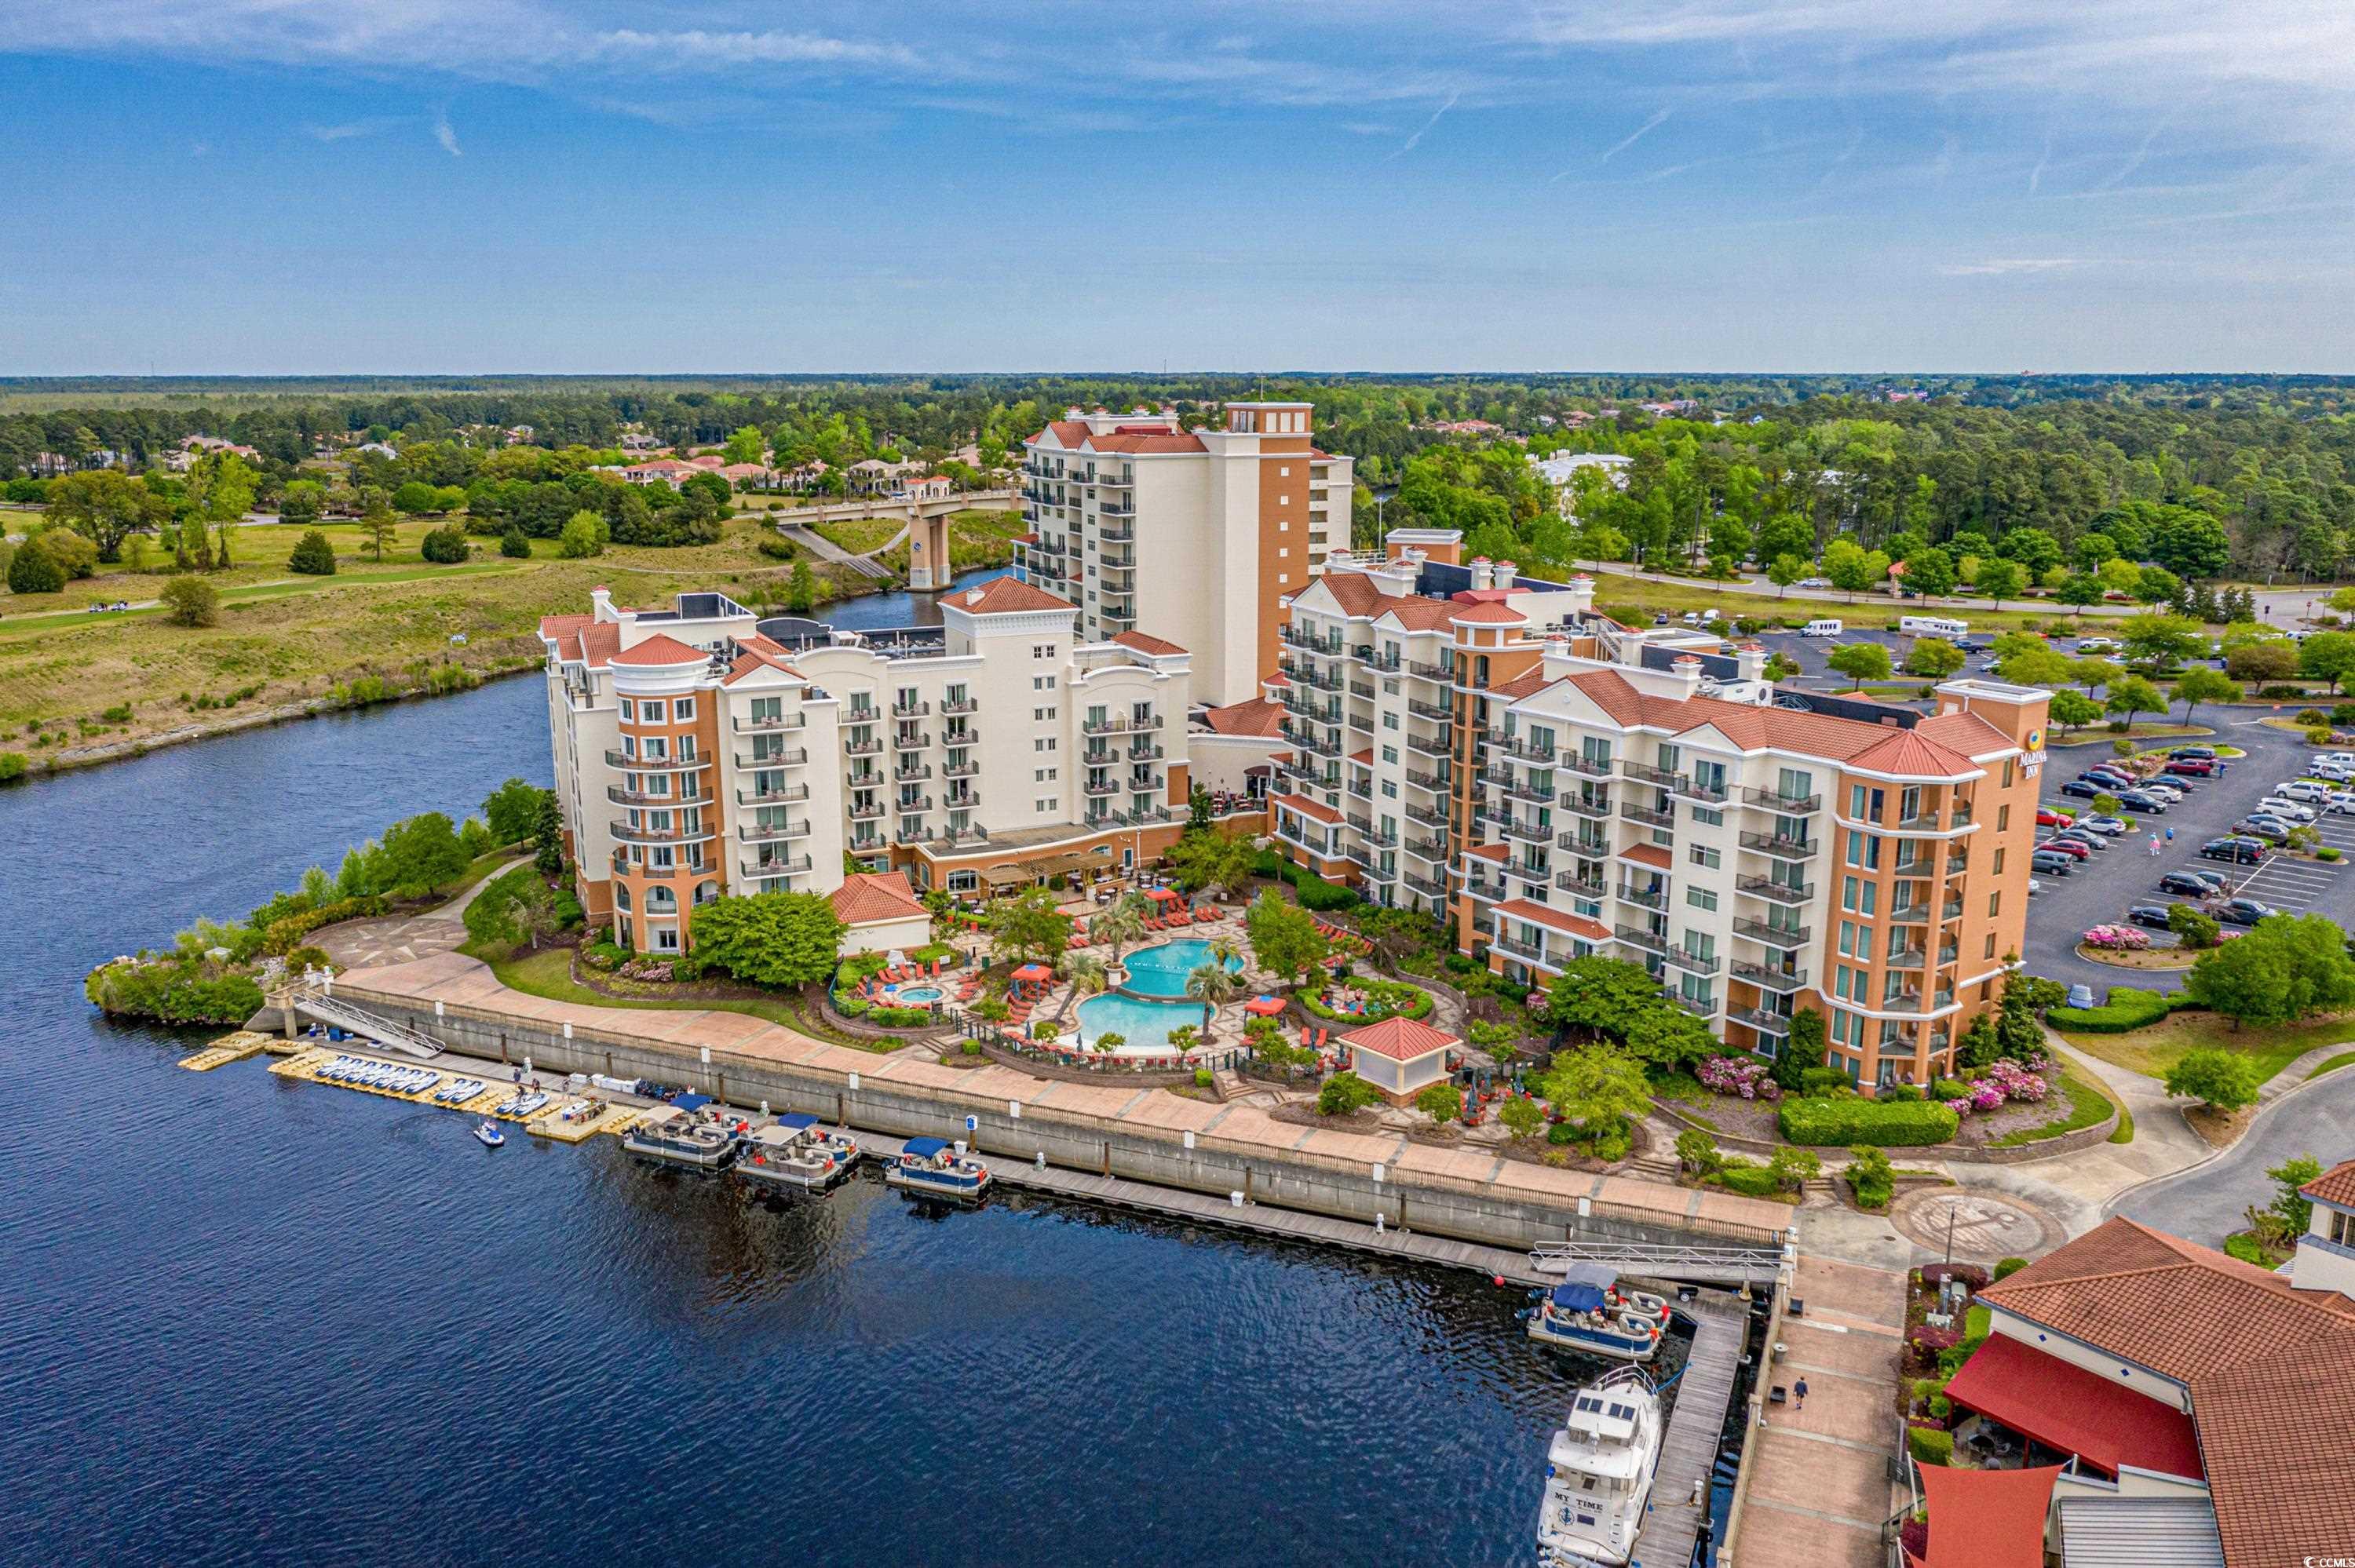 experience luxury living on the intracoastal waterway in this stunning 2-bedroom condo on the 9th floor. located in the beautiful marina inn at grande dunes, this unit offers a spectacular blend of convenience, comfort, and breathtaking views of the waterway and the grande dunes golf course.   this luxury condo grants you access to a range of superb amenities. take a refreshing dip in the sparkling indoor and outdoor swimming pools or hot tub, enjoy valet parking service, fitness center, waterscapes restaurant, reflections bar, in room dining, business center and more. the building is also conveniently located next to ruth’s chris steakhouse and the anchor café.   as an owner in the grande dunes, you have access to the private member’s only ocean club resort, which includes an oceanfront pool with food and beverage service, hot tub, beach access, bars, fine dining, meeting room, and member social activities and events.   unit 9405 offers a spacious layout that connects the kitchen, dining, and living areas. the main living area features a fireplace and large balcony. the primary suite offers a king bed, private balcony, and an en-suite bathroom. the guest bedroom encompasses two queen beds and leads into another full bathroom with in-unit washer and dryer. this unit comes fully furnished, just bring your suitcase!  the marina inn at grande dunes is conveniently located in myrtle beach near the beach, marina with boat docks, shopping, dining, entertainment and the grand strand medical center. great as primary residence, second home or investment property. schedule your tour today! square footages are approximate. all information is deemed reliable but should be verified by buyer.